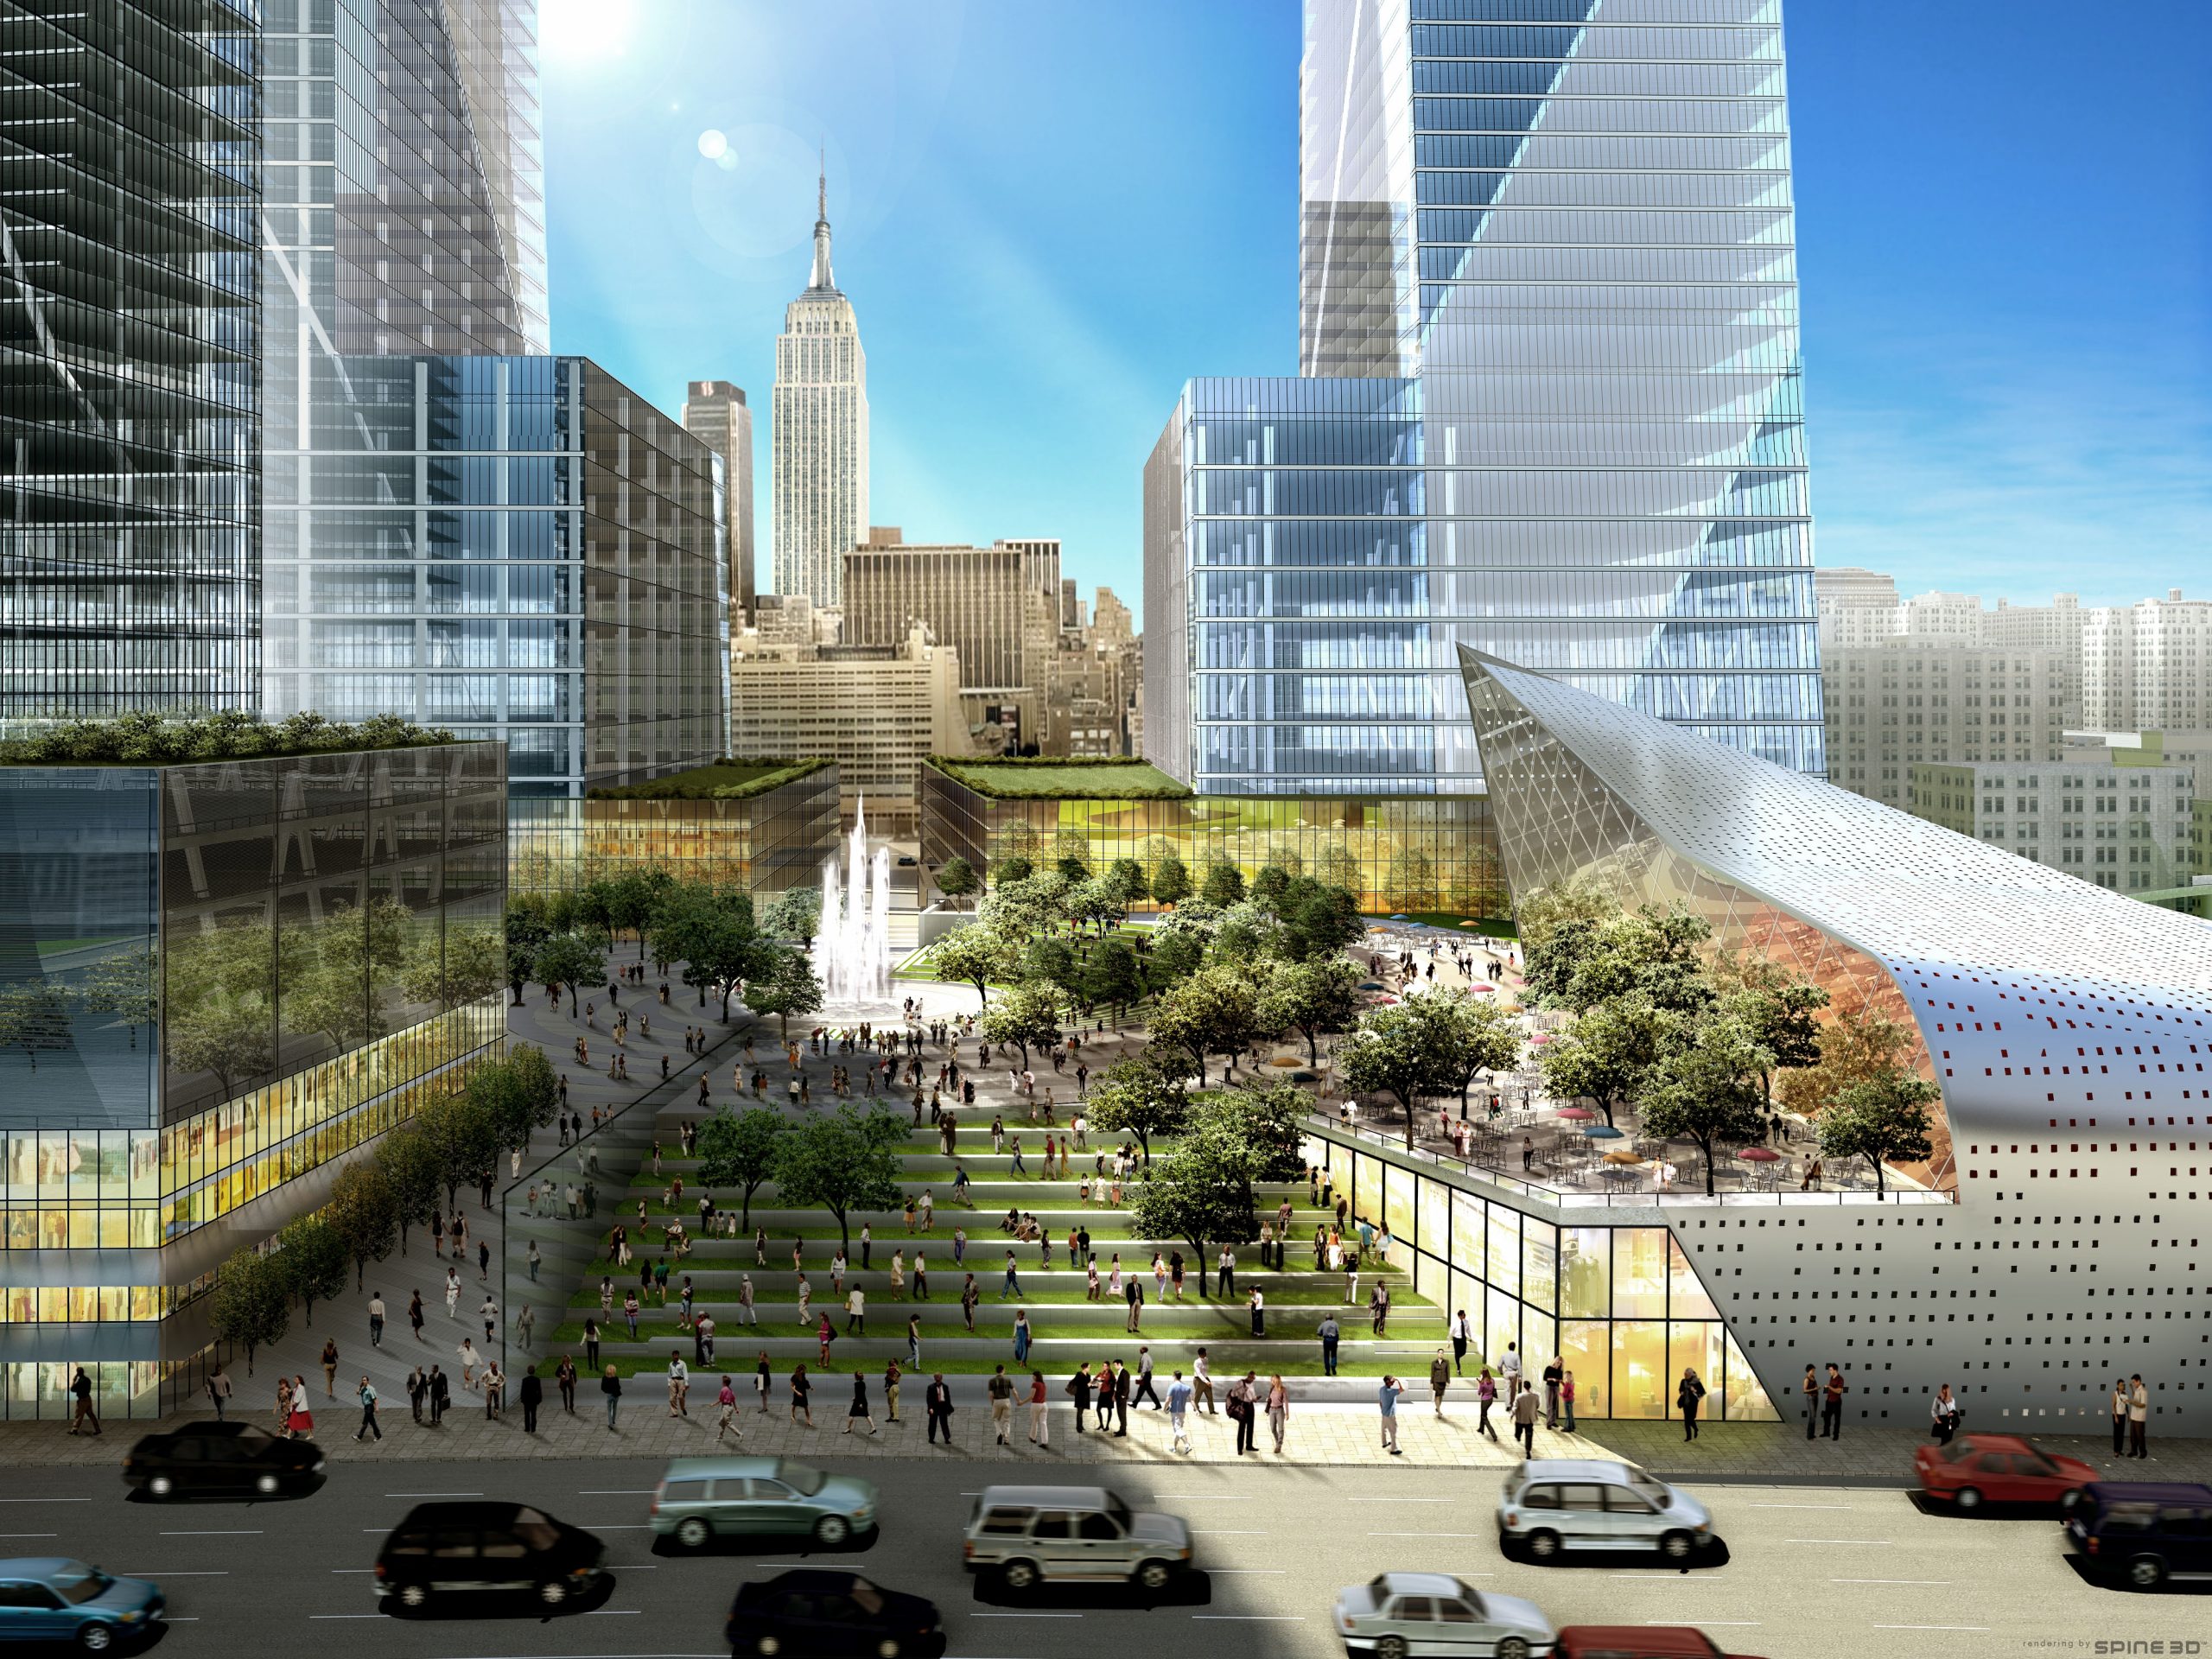 GO to Hudson Yards: A New City Rising